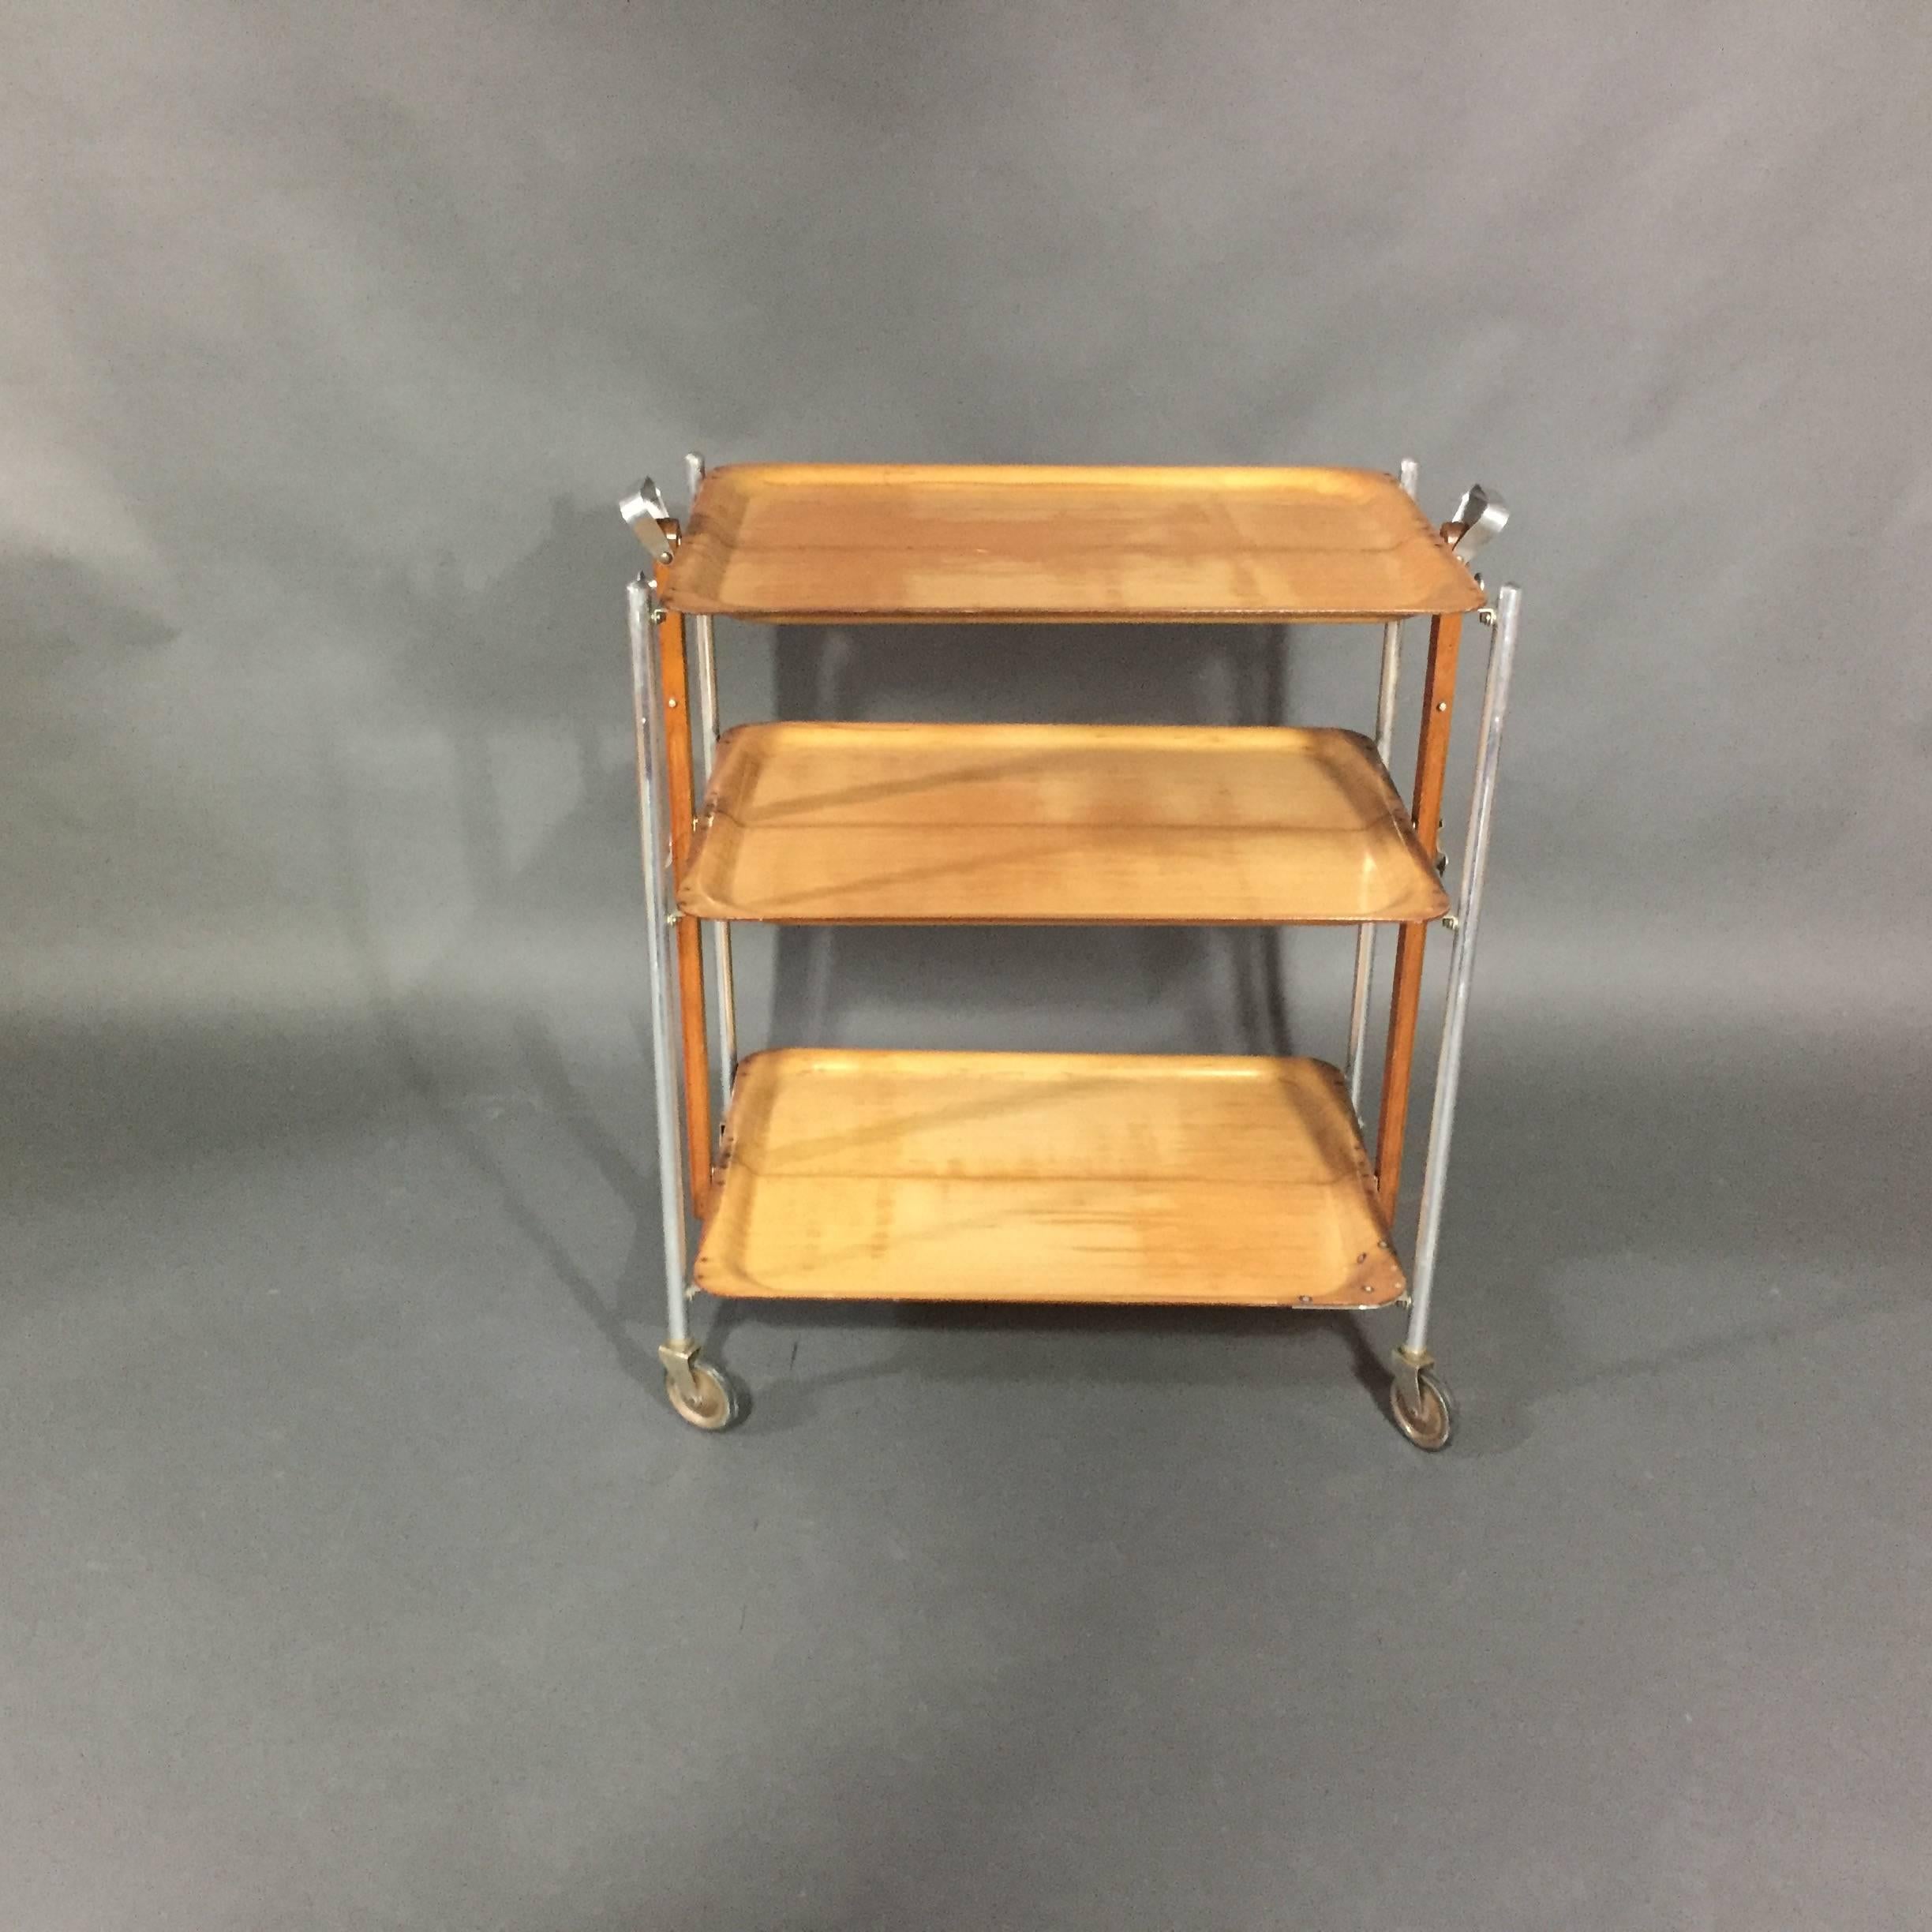 A rather amusing three level bar cart with a structure that allows the entire piece to be folded for easy storage.  Each tray is a molded light wood that is support by chrome legs.  Handy bottle openers to each side.  Labeled "Textable